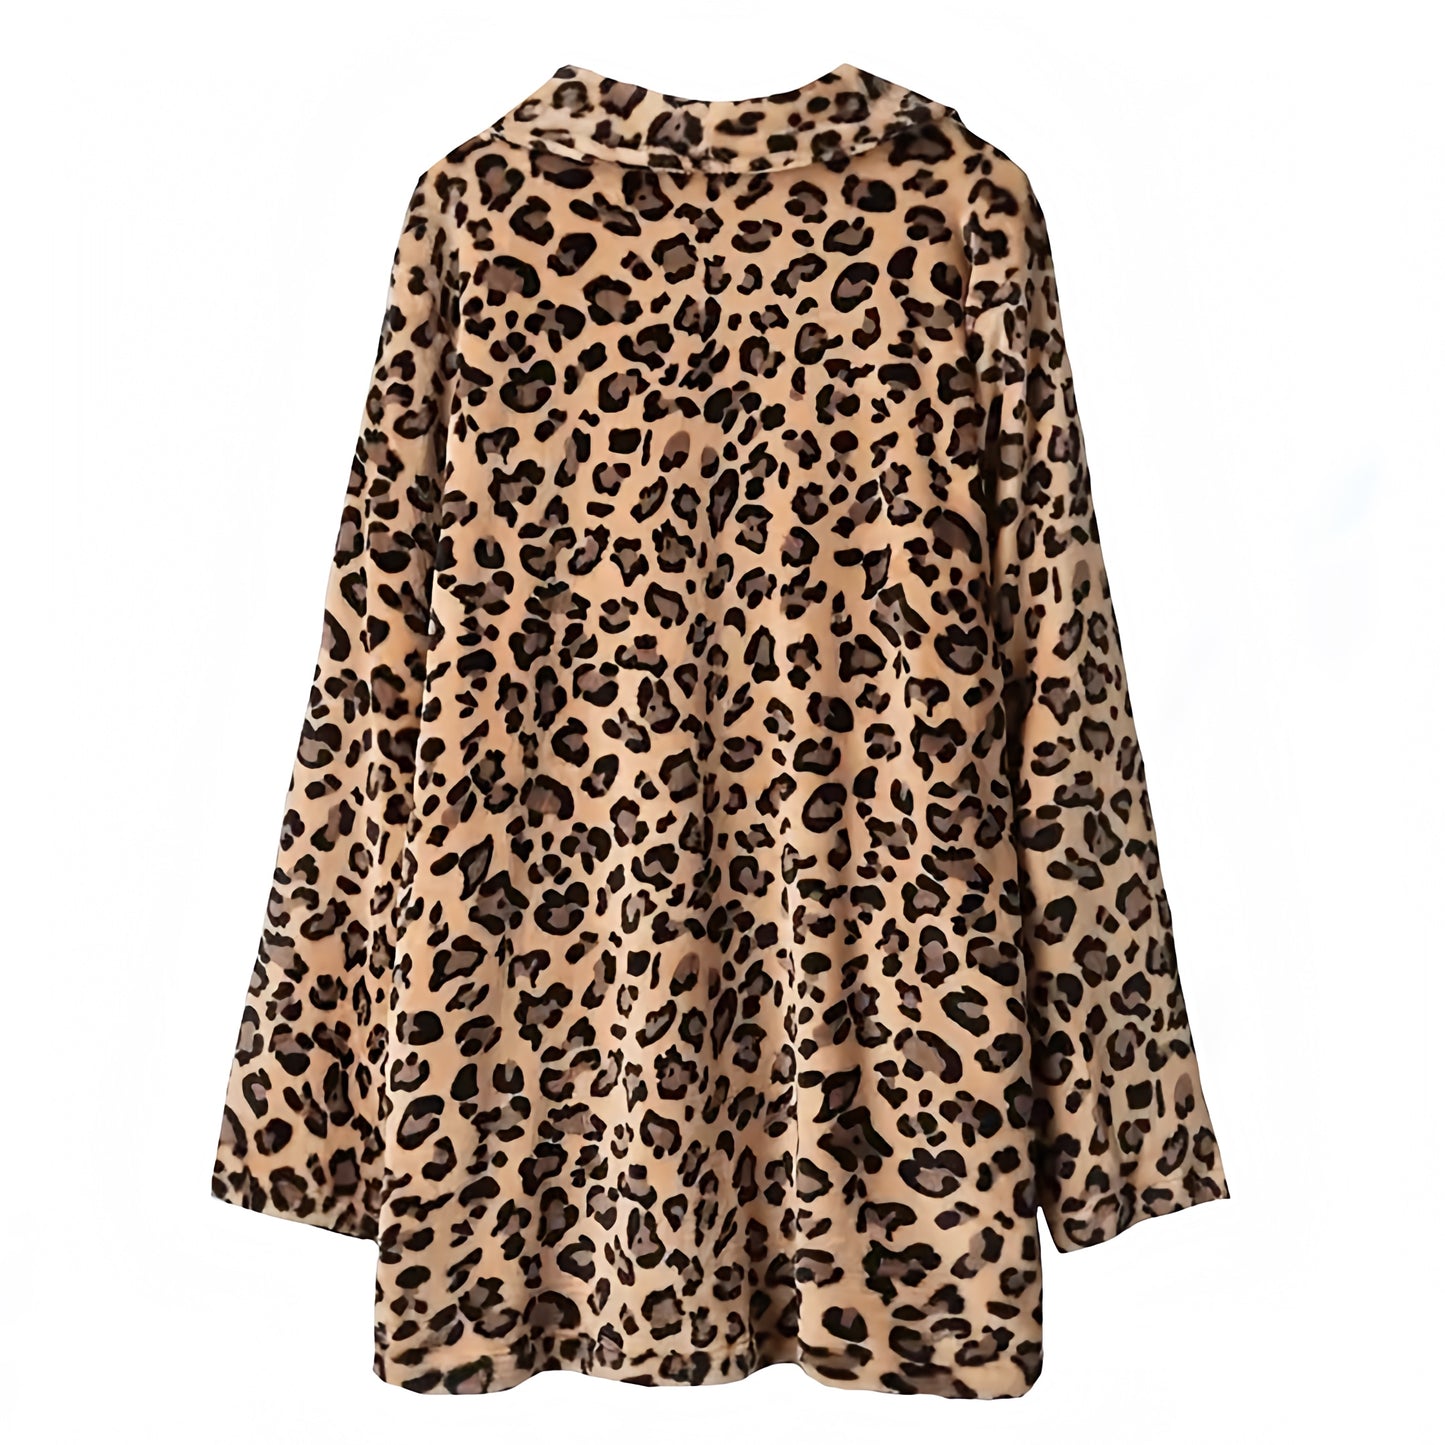 leopard-cheetah-animal-print-patterned-brown-black-multi-color-faux-fur-long-sleeve-collared-v-neck-oversized-trench-coat-jacket-blazer-overcoat-women-ladies-chic-trendy-spring-2024-summer-elegant-casual-classy-y2k-party-club-wear-sexy-date-night-out-exotic-mob-wife-zara-revolve-white-fox-jaded-london-princess-polly-edikted